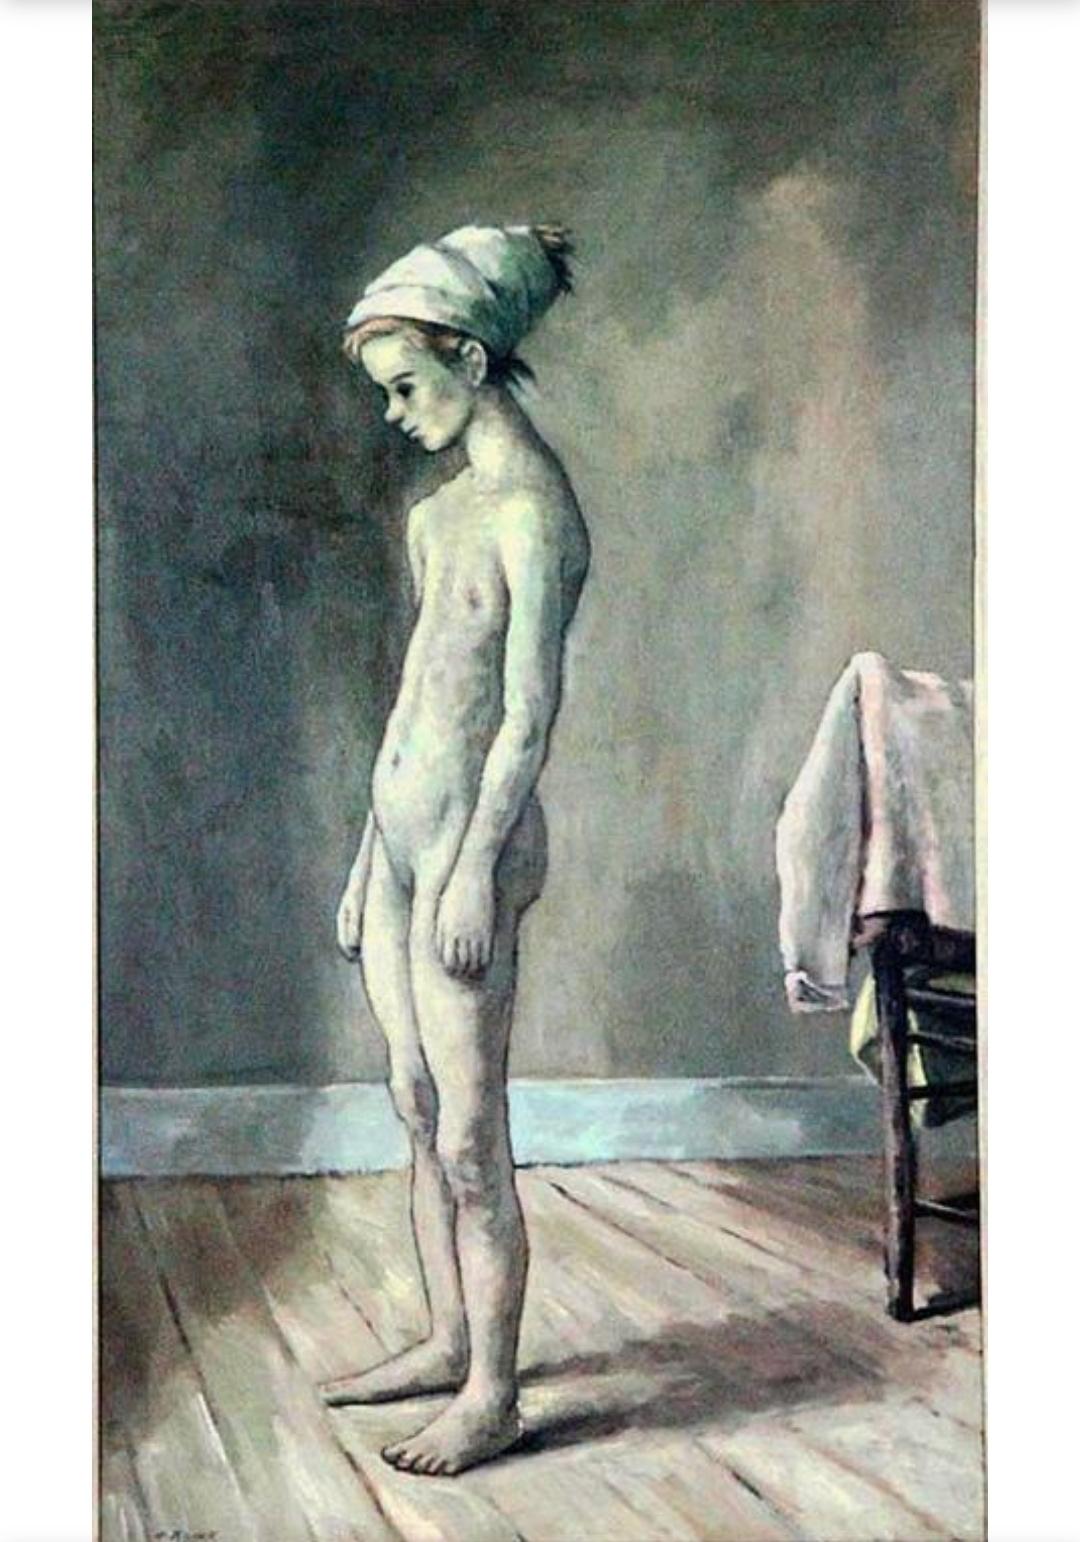 Signed dated ad titled “The Irresistible Landscape”.  This painting was personal to the artist as Brook was born on July 14, 1898 ad at the age of twelve was bed-ridden with Polio. This painting is a self-portrait showing the artist looking out the